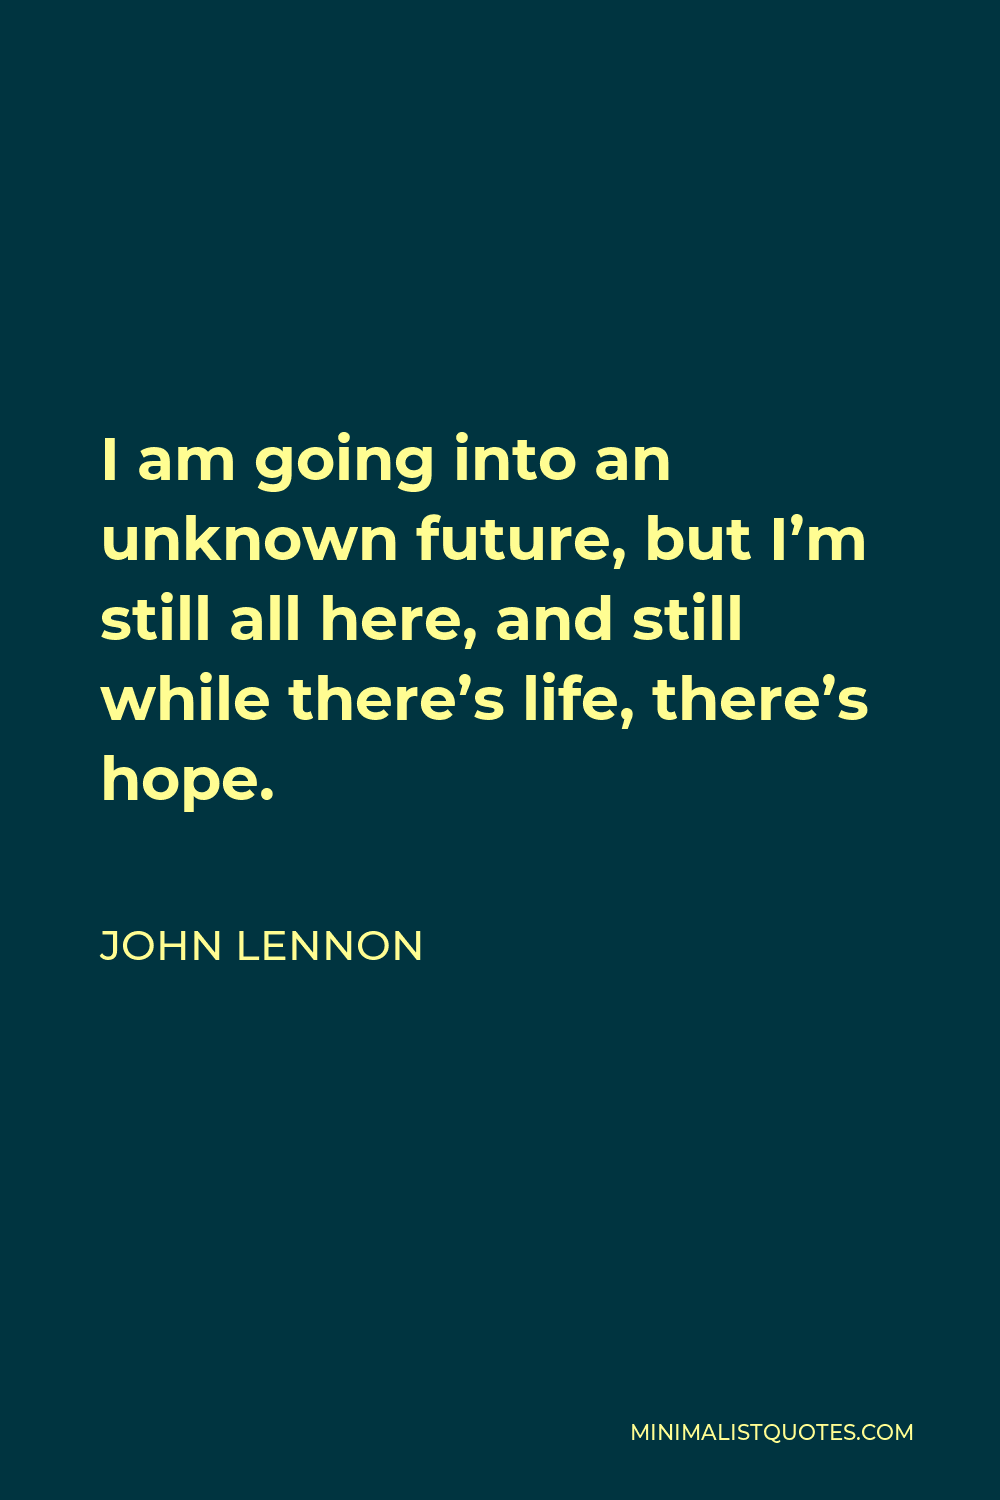 John Lennon Quote: I am going into an unknown future, but I'm still all ...